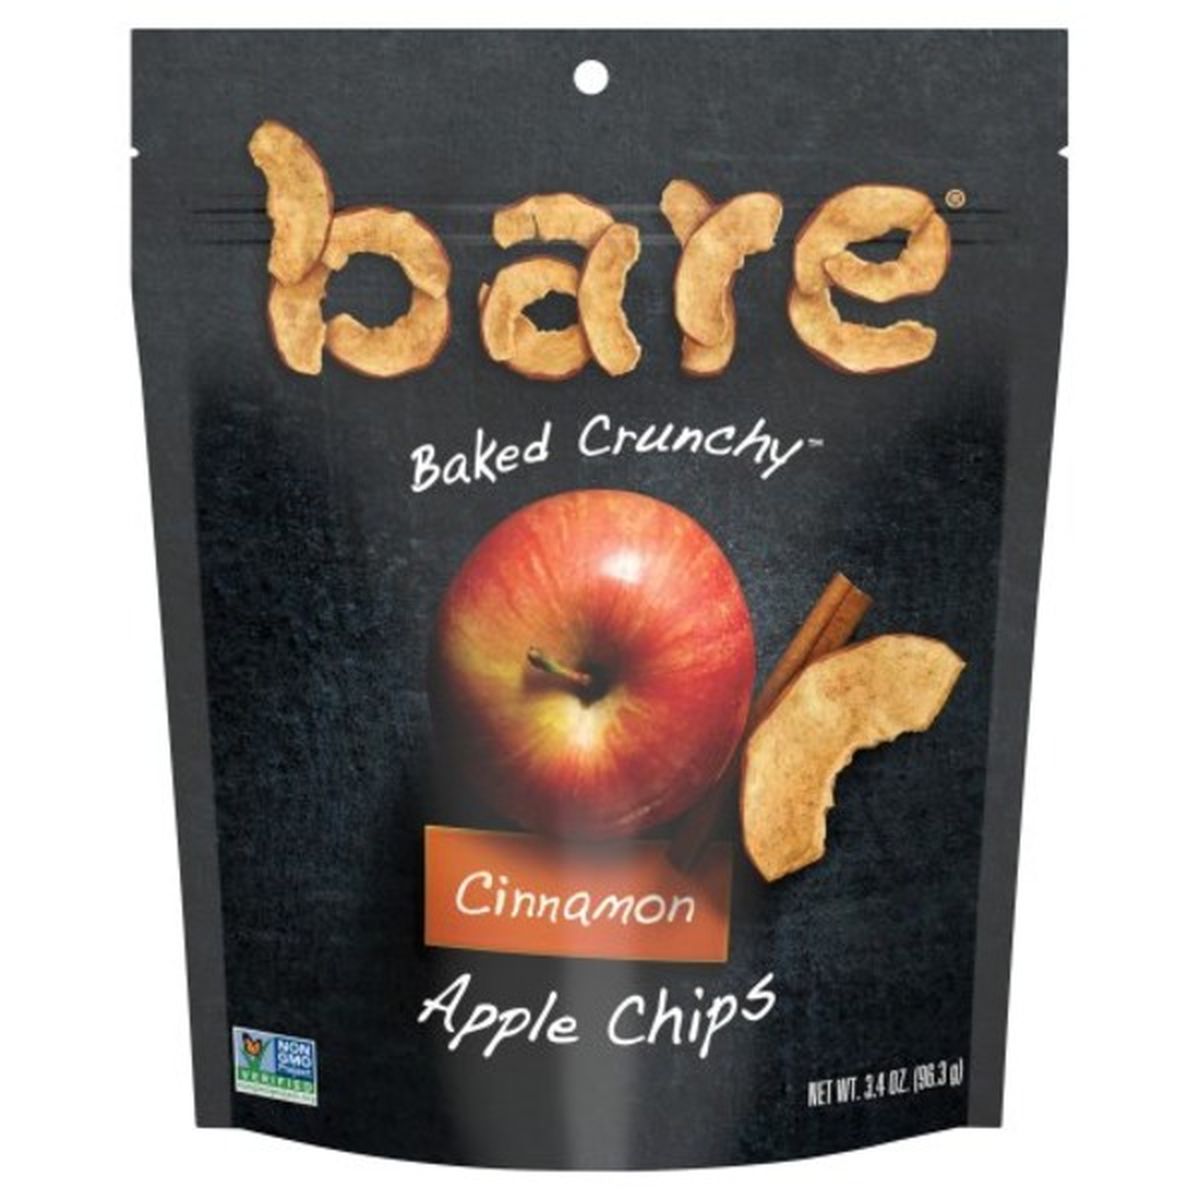 Calories in Bare Baked Crunchy Apple Chips, Cinnamon